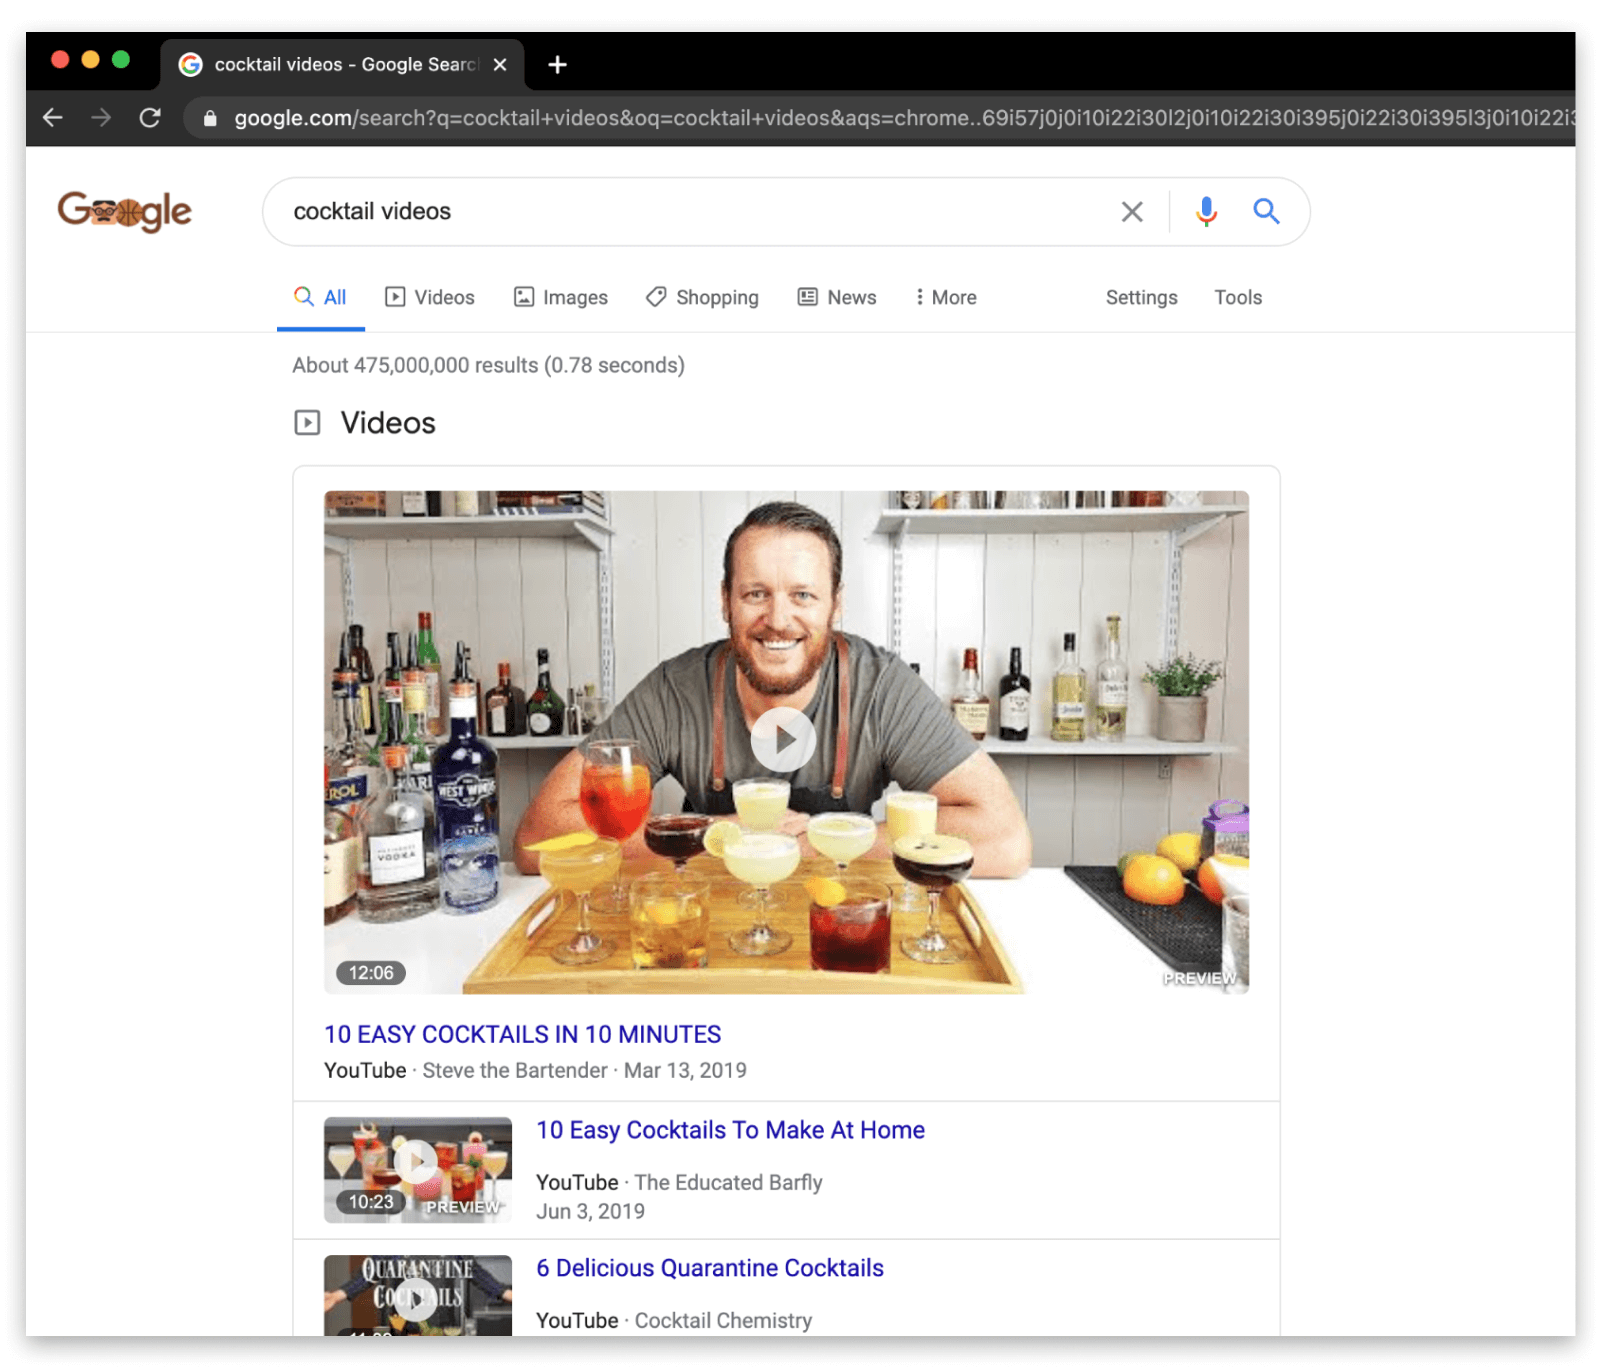 Searching for 'cocktail videos' in Google to discover YouTube channel ideas